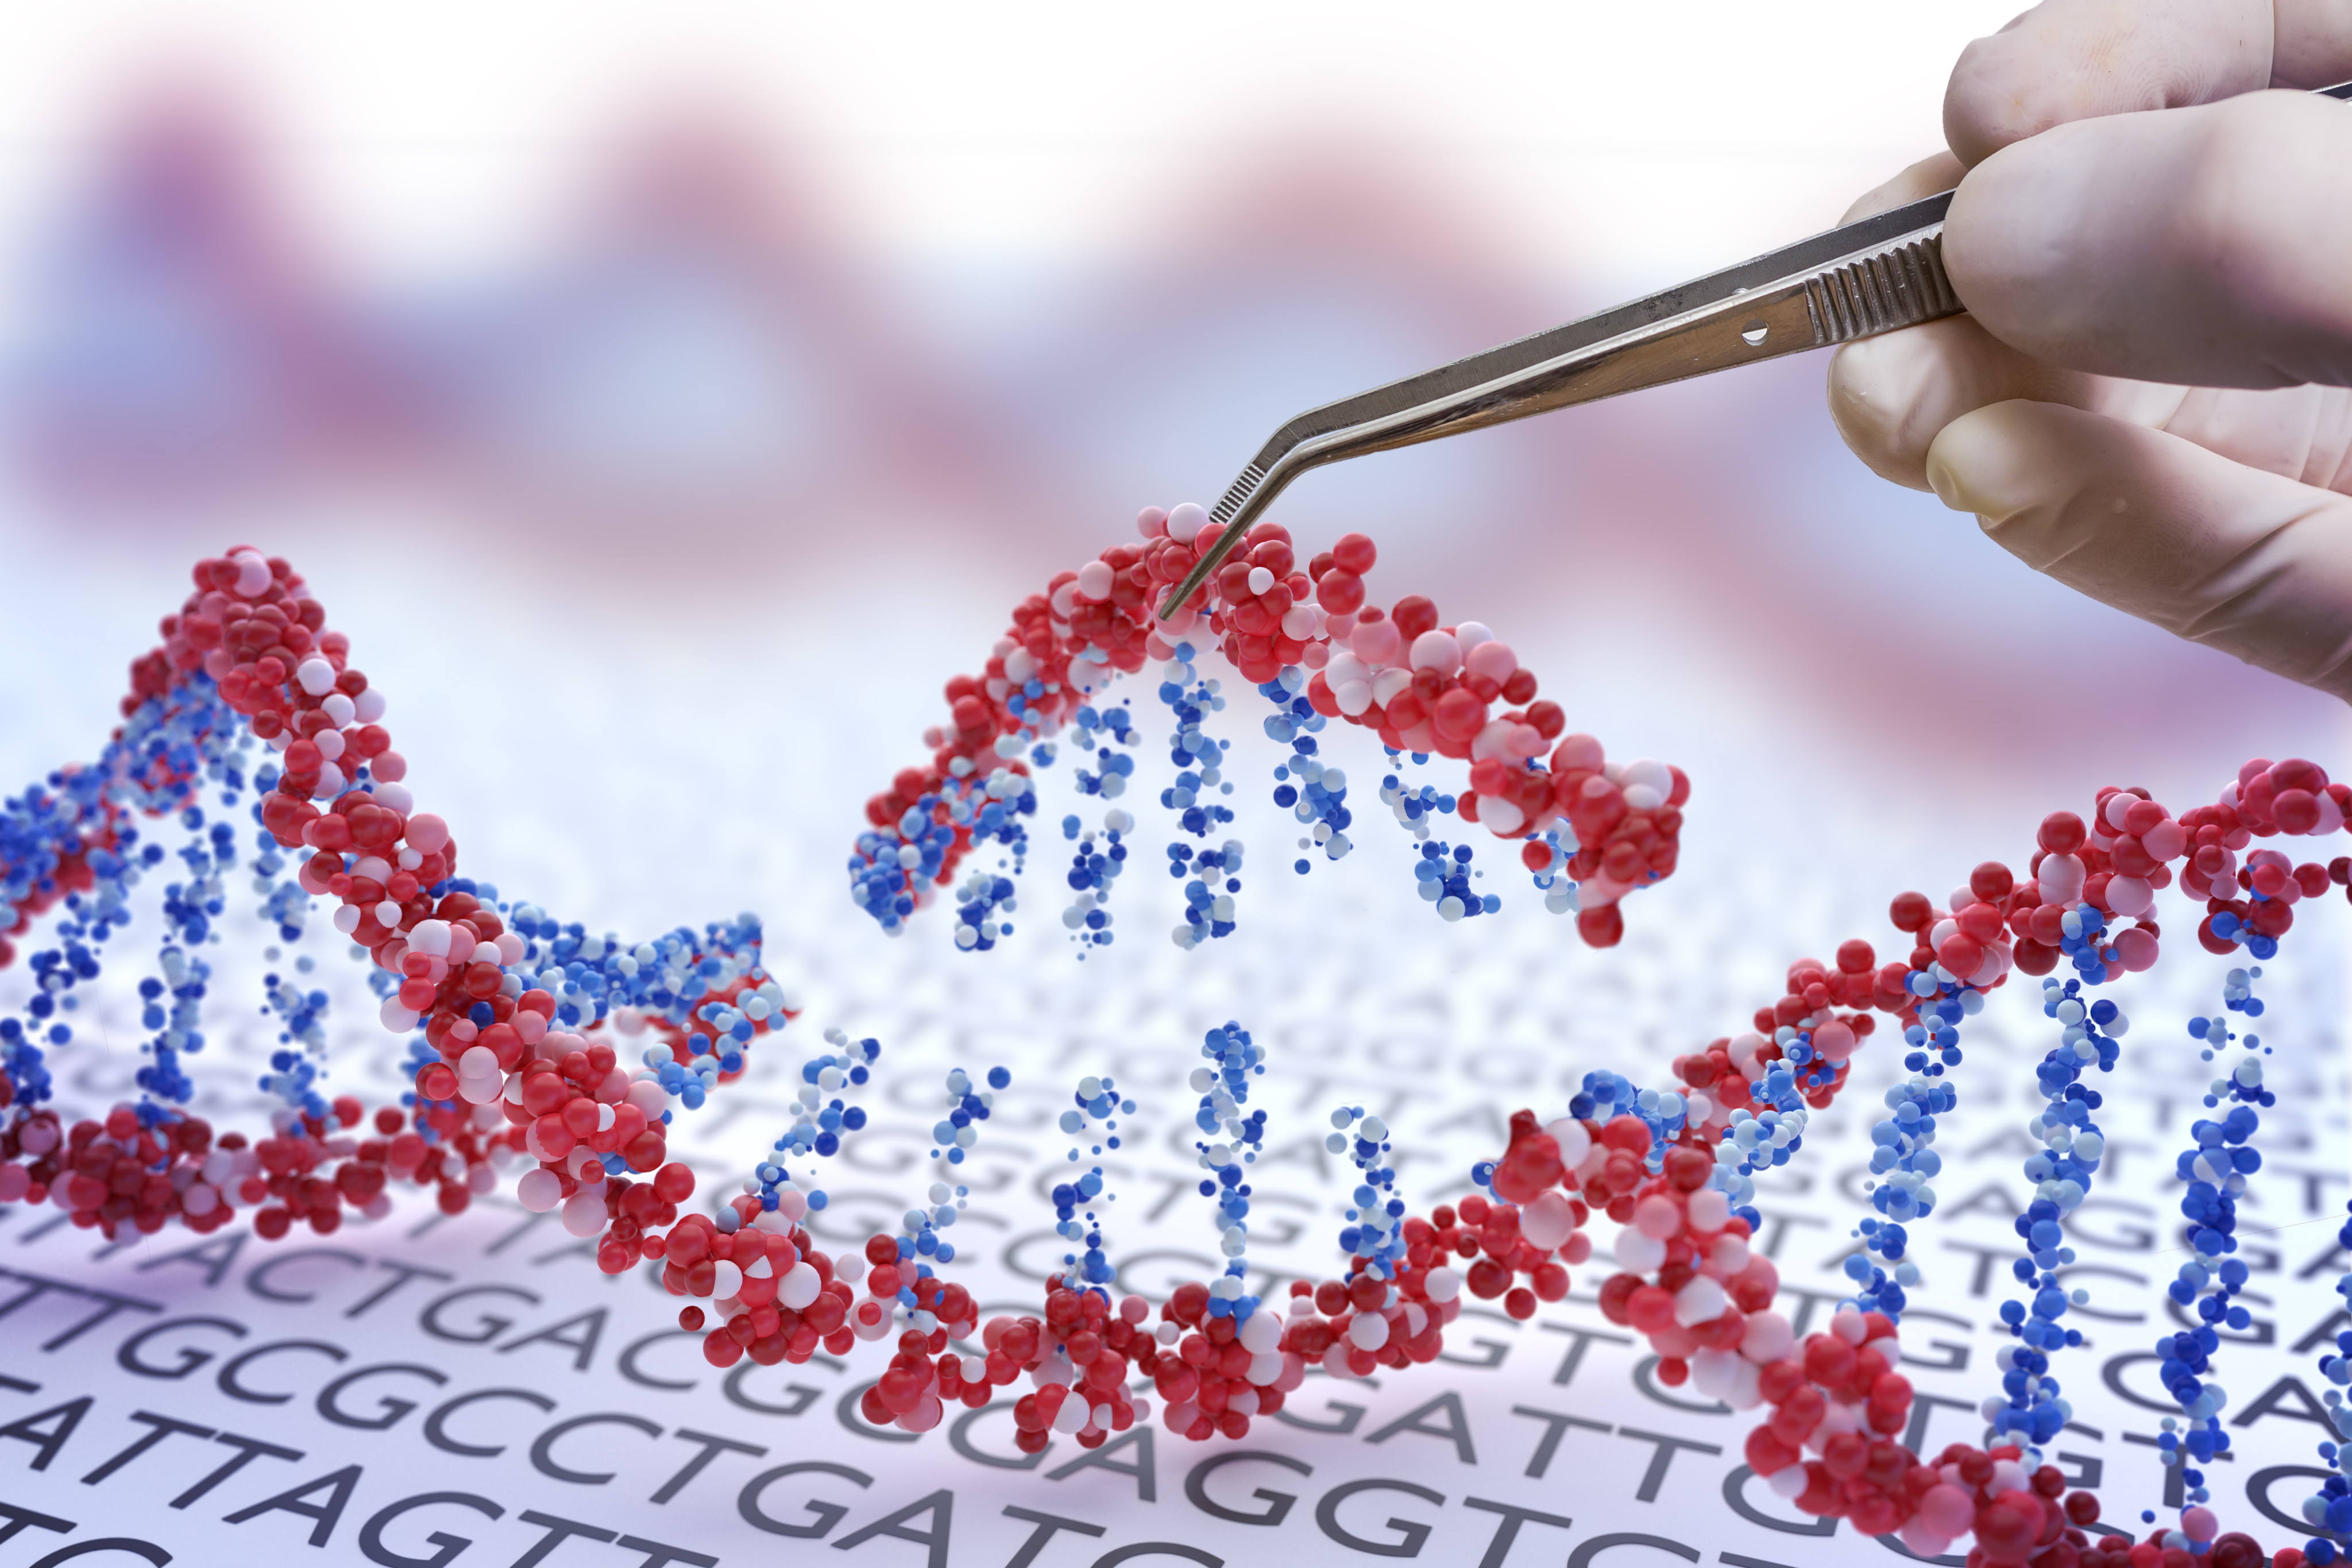 One reader writes that while genetic engineering holds an important role in improving human health, it comes with its own set of issues. Photo: Shutterstock